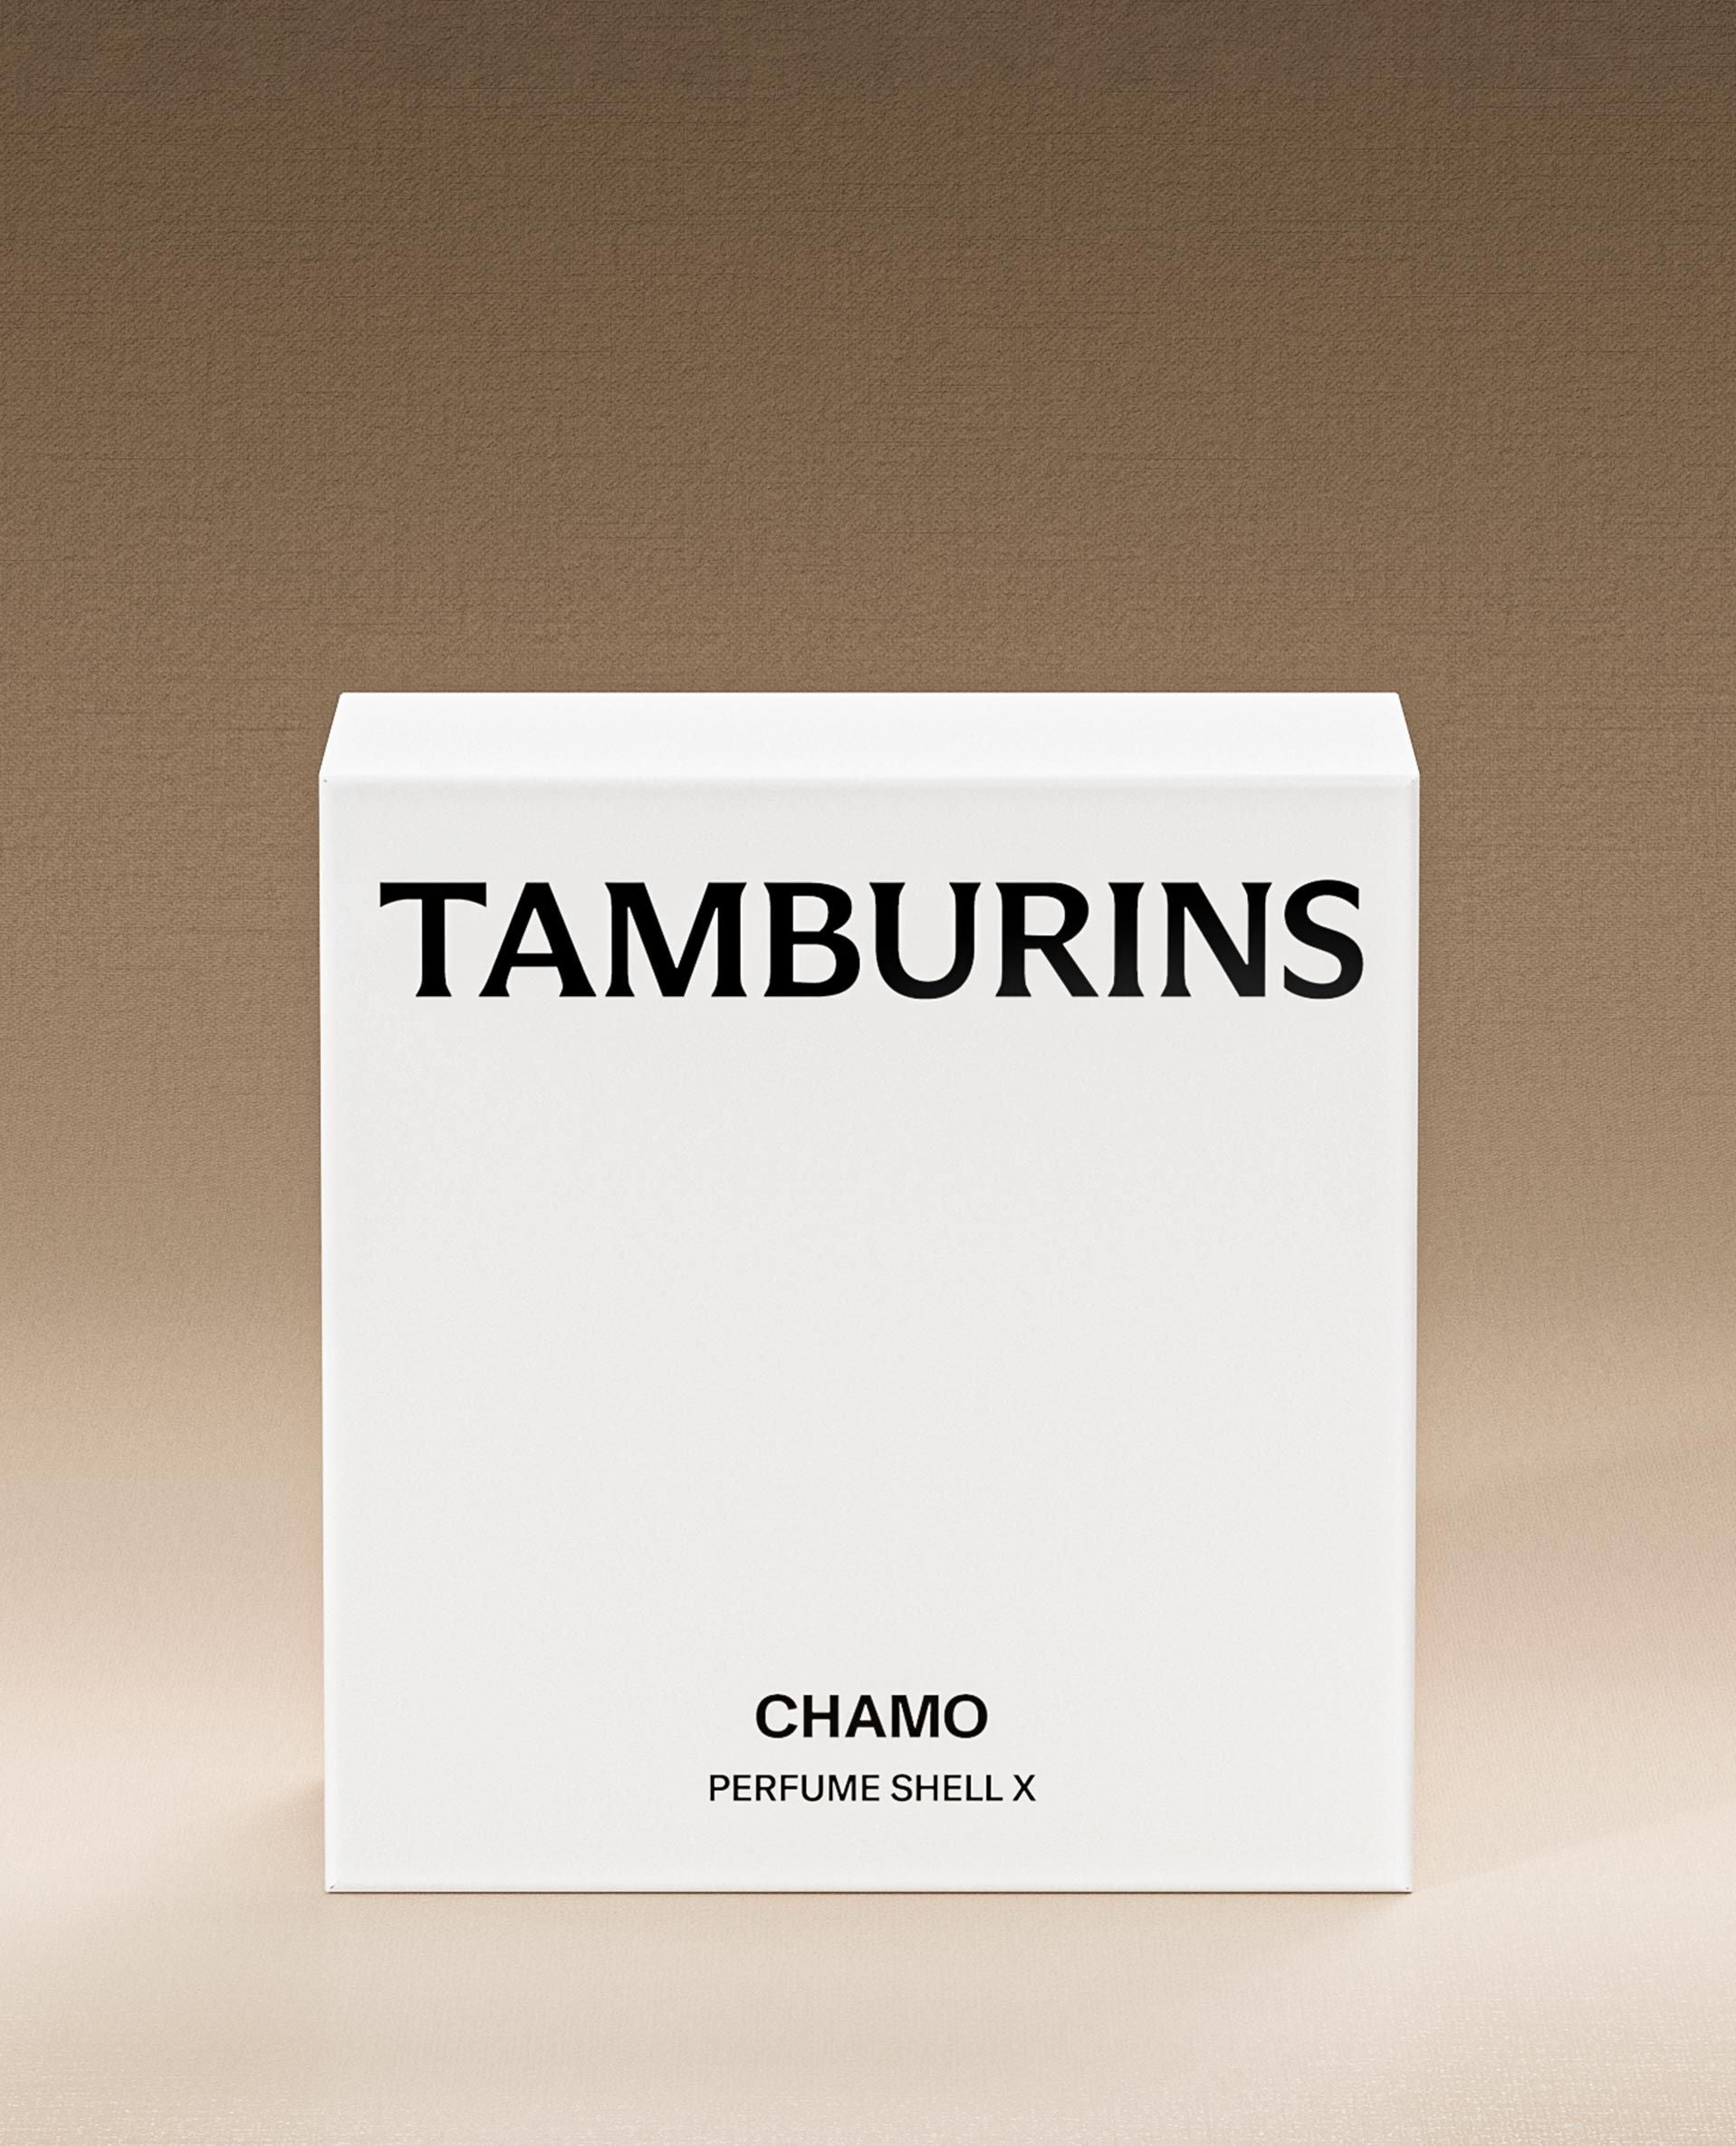 TAMBURINS PERFUME SHELL X CHAMO 30ml - Portable 30ml size, ideal for travel or on-the-go use